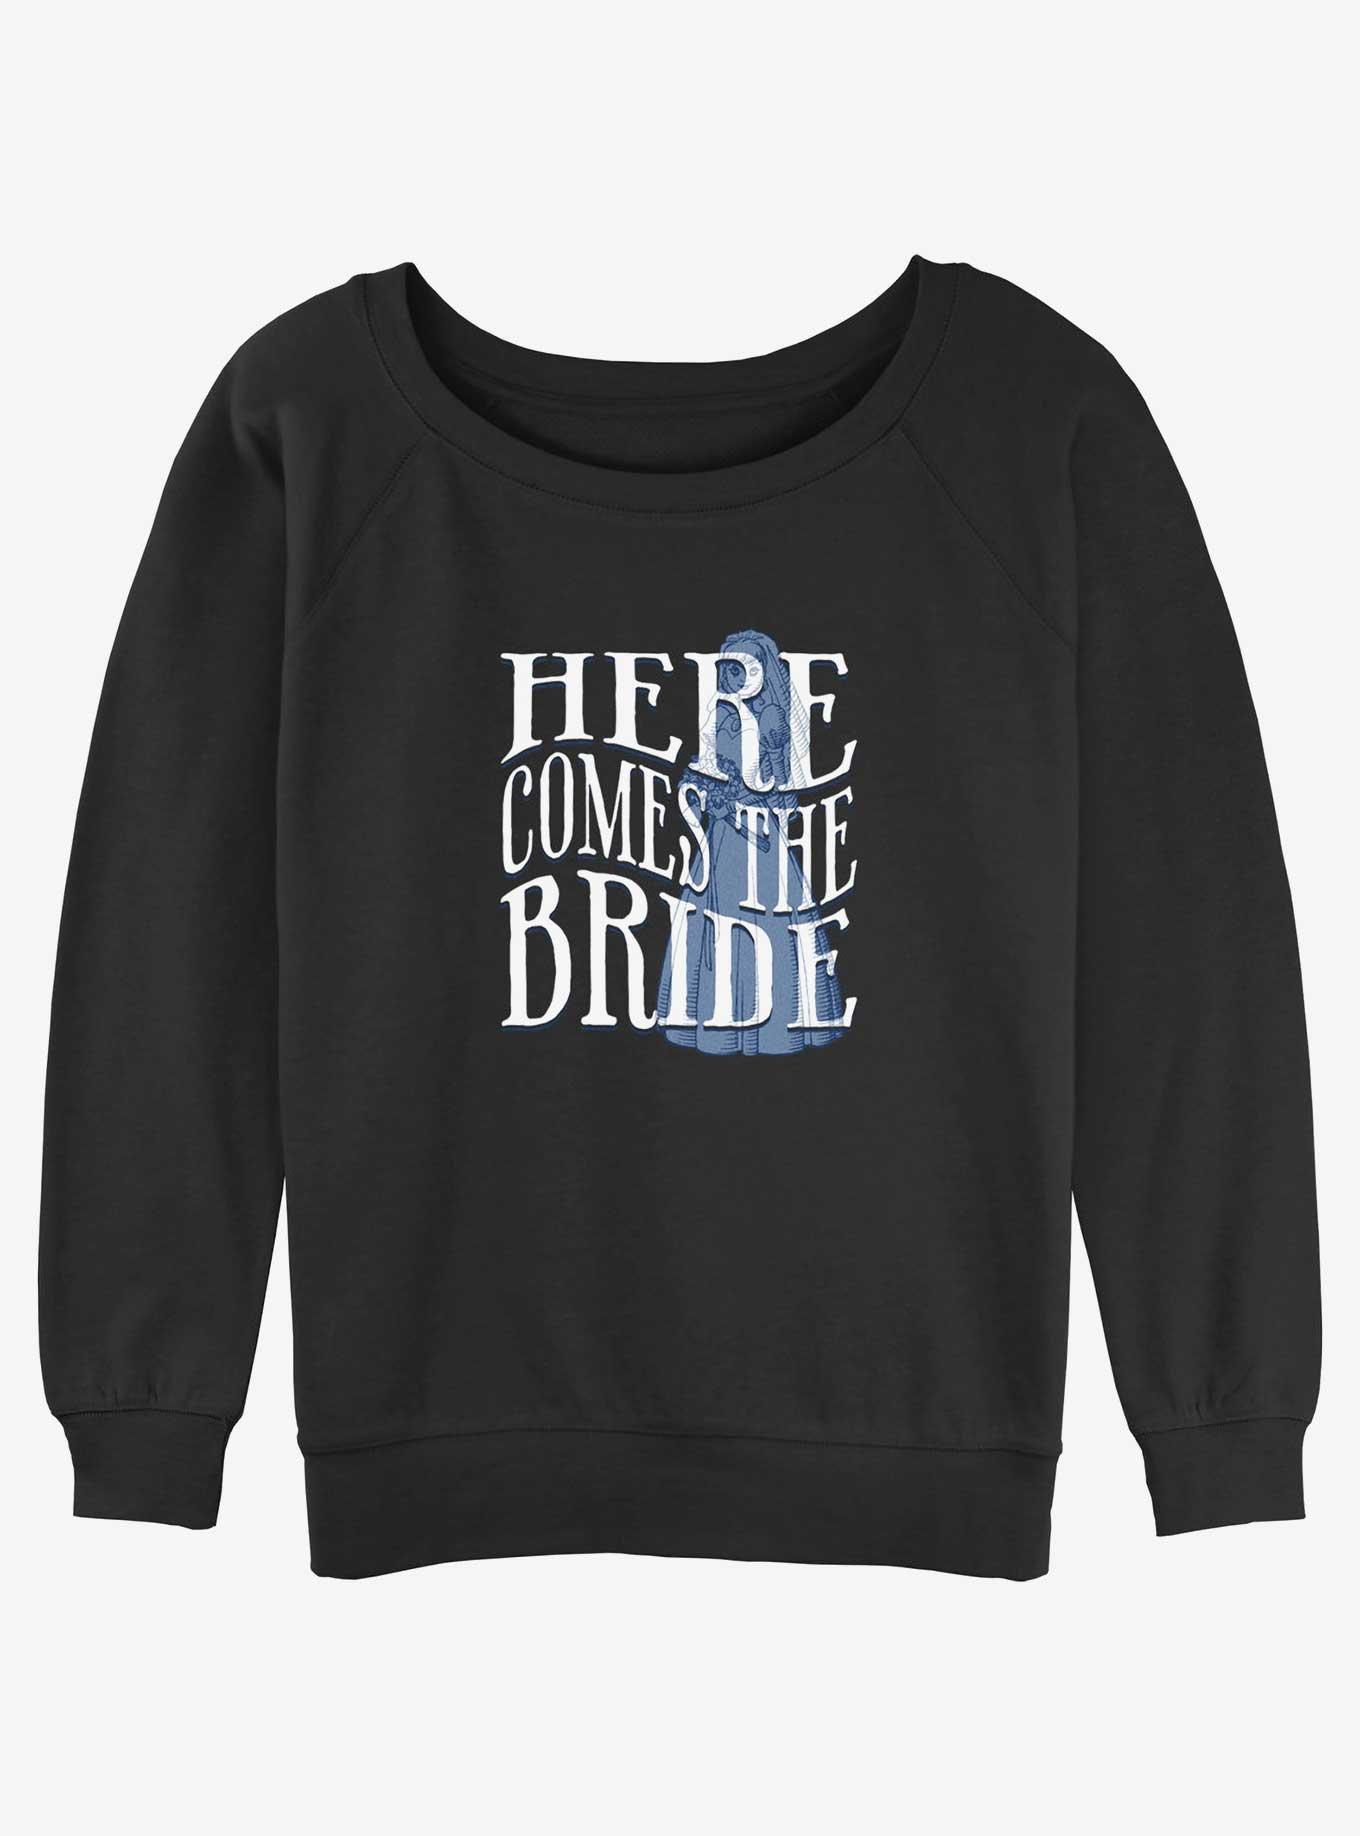 Disney Haunted Mansion Here Comes The Ghost Bride Womens Slouchy Sweatshirt, BLACK, hi-res